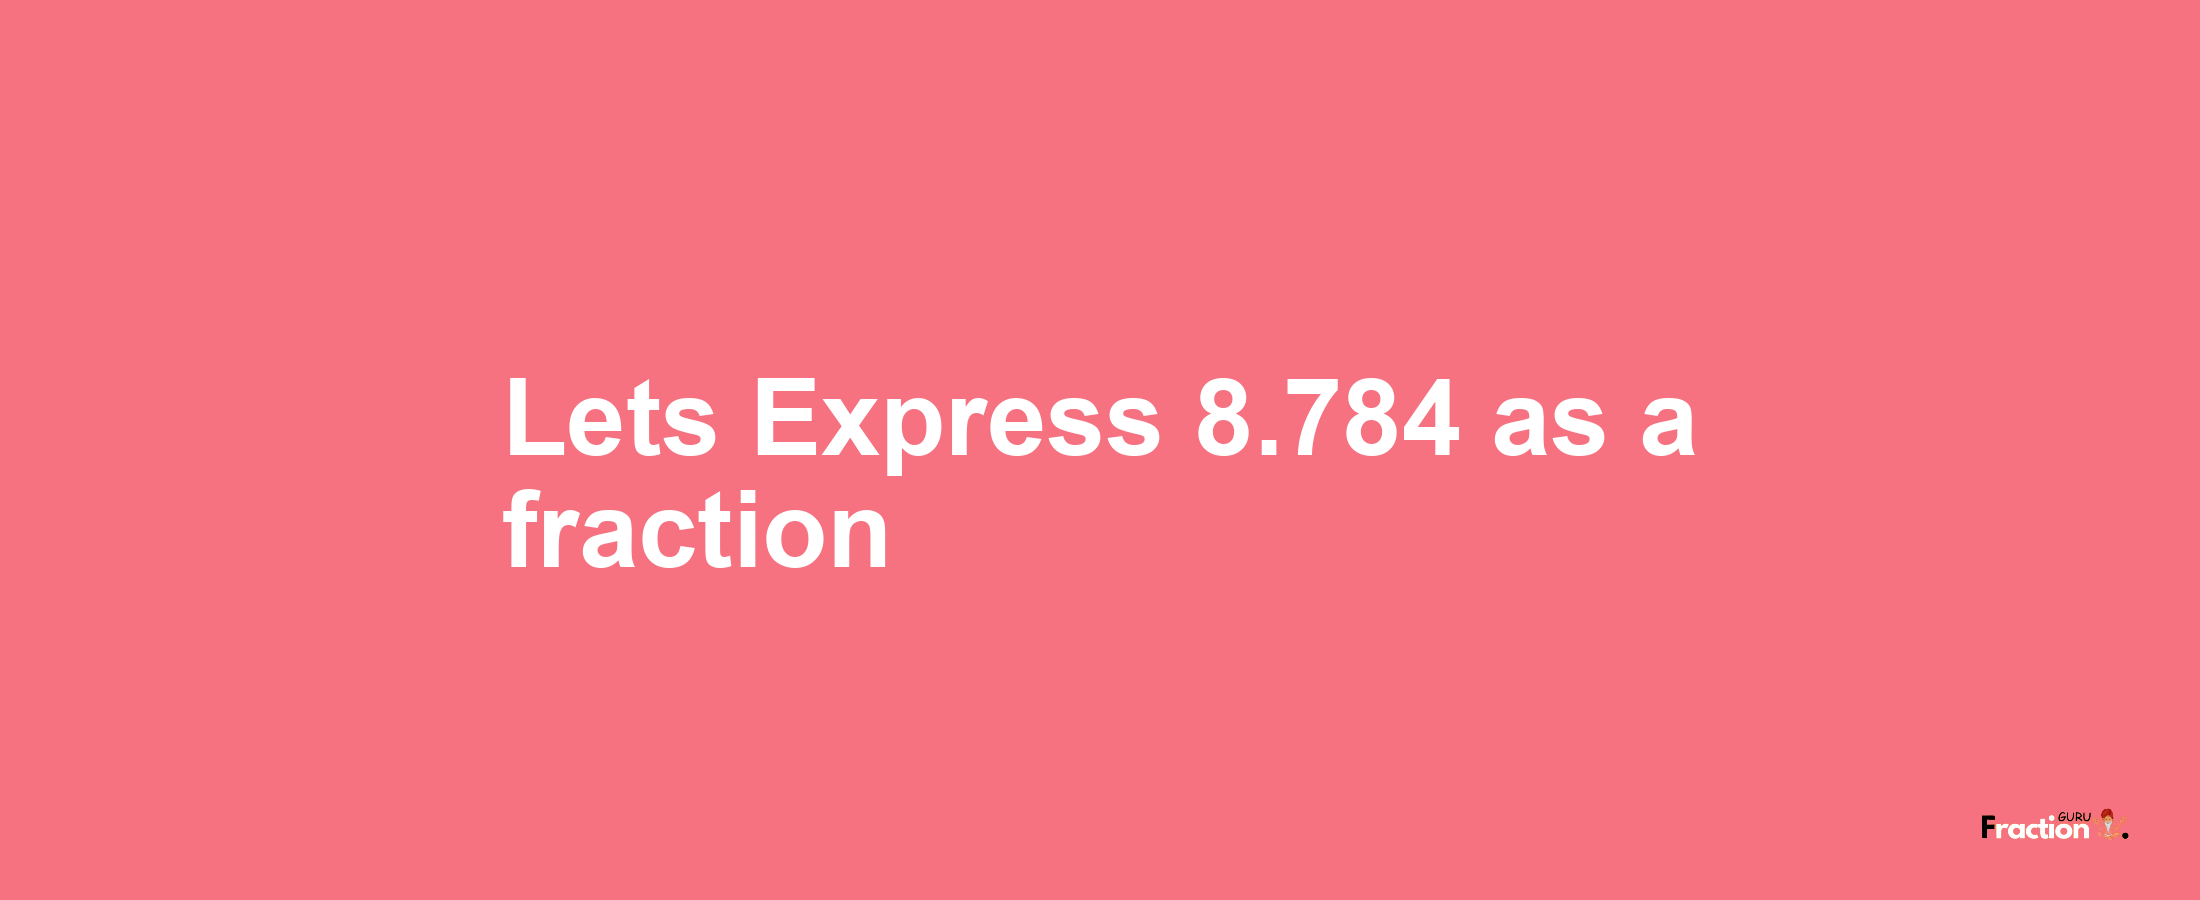 Lets Express 8.784 as afraction